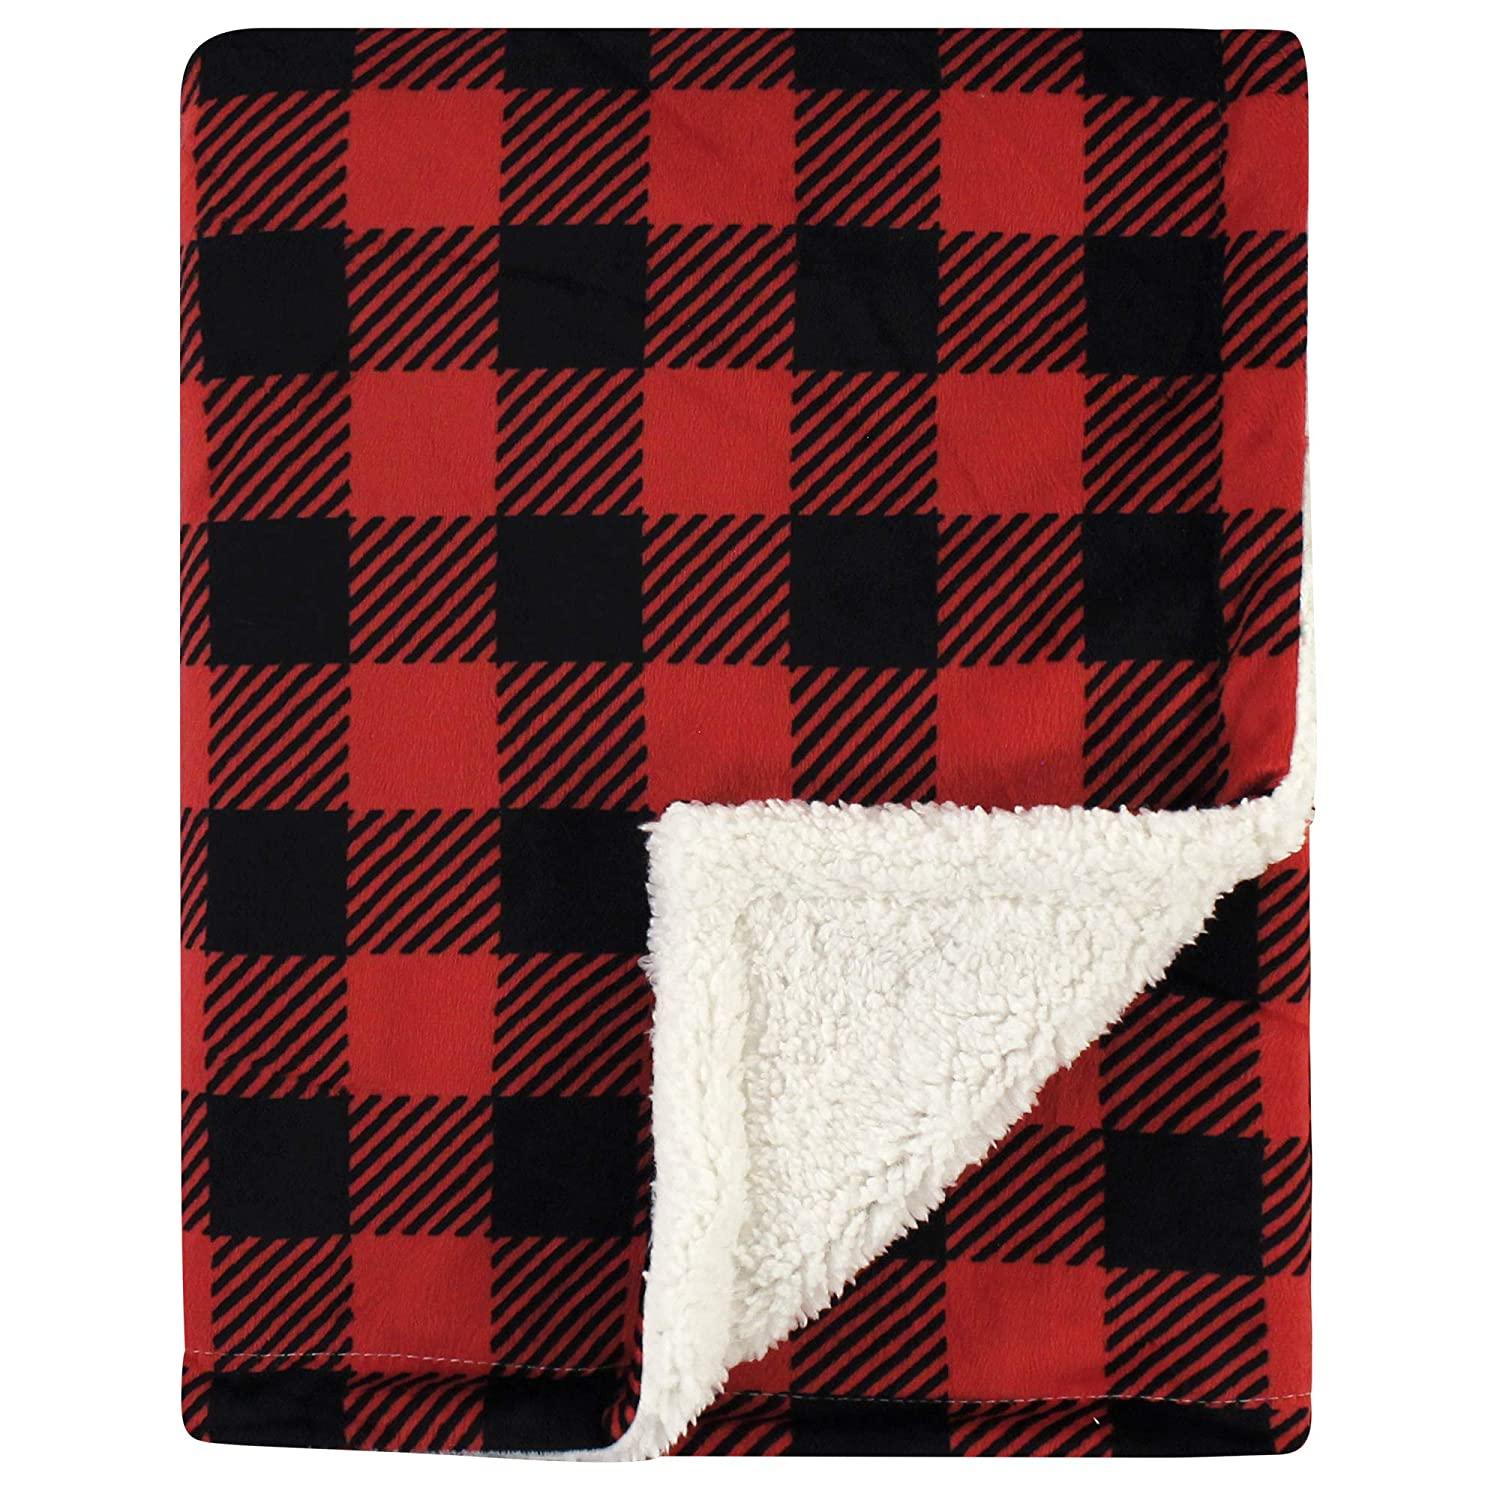 Hudson Baby Unisex Baby Plush Blanket with Sherpa Back for $6.13